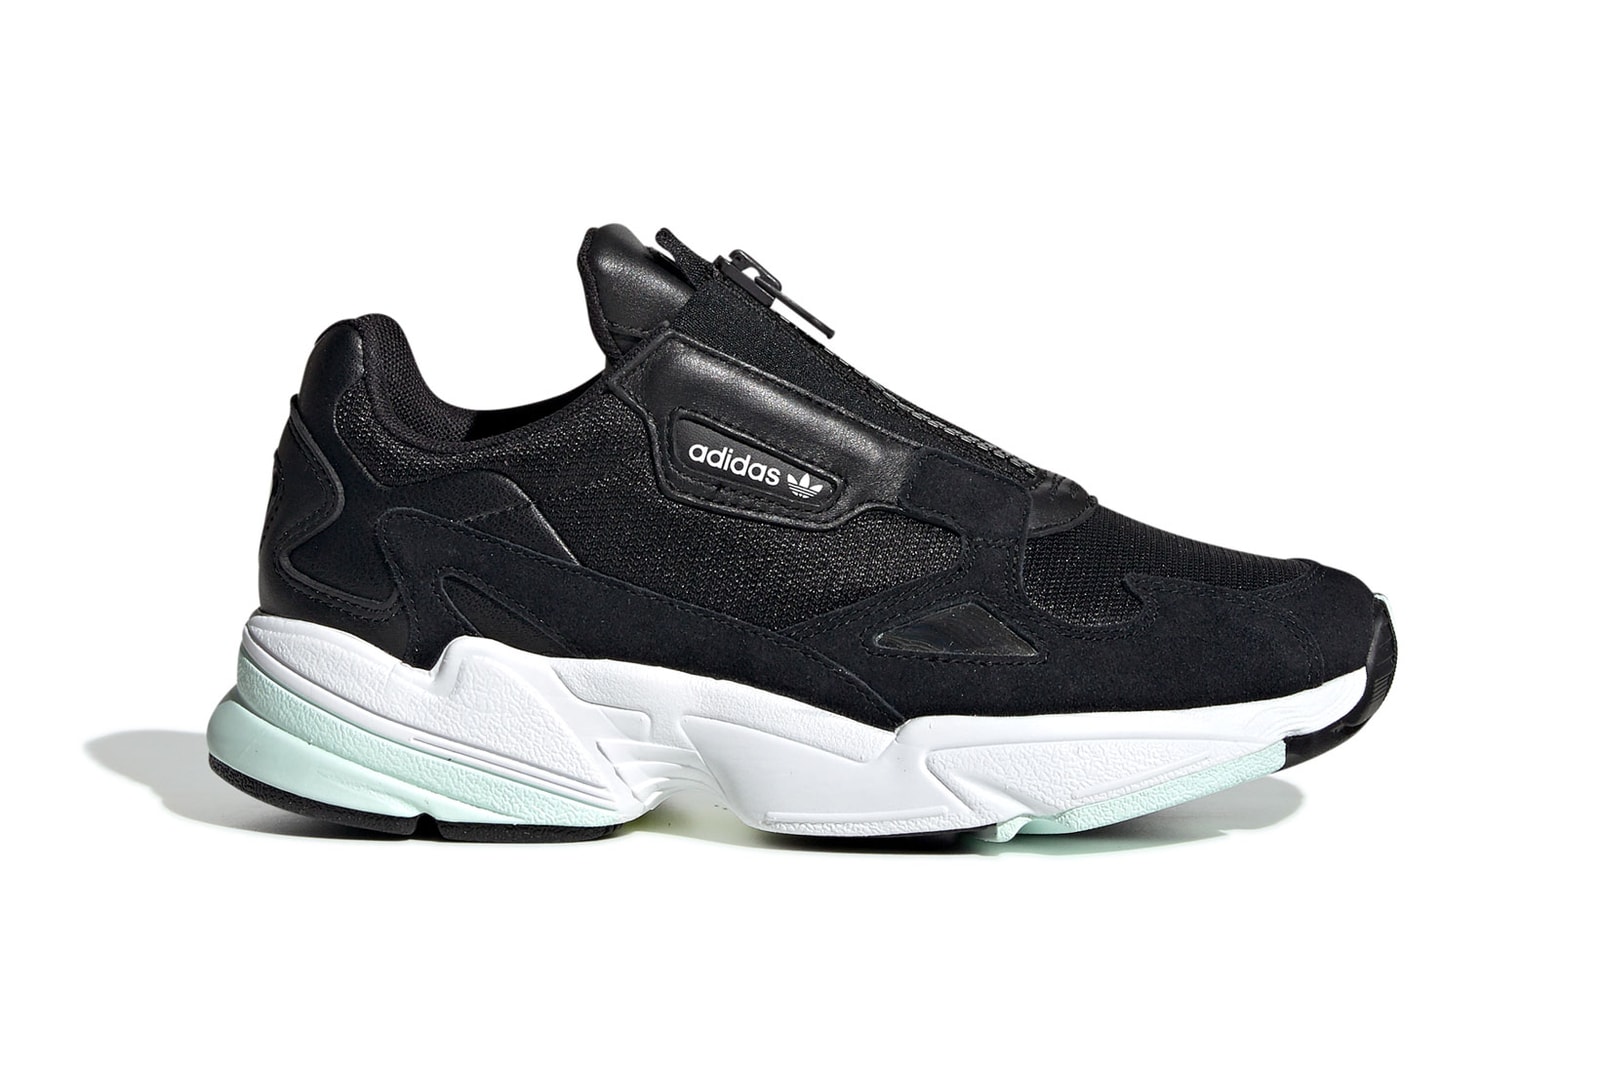 adidas Falcon Zip in Black White | adidas classic airliner bag | Iicf